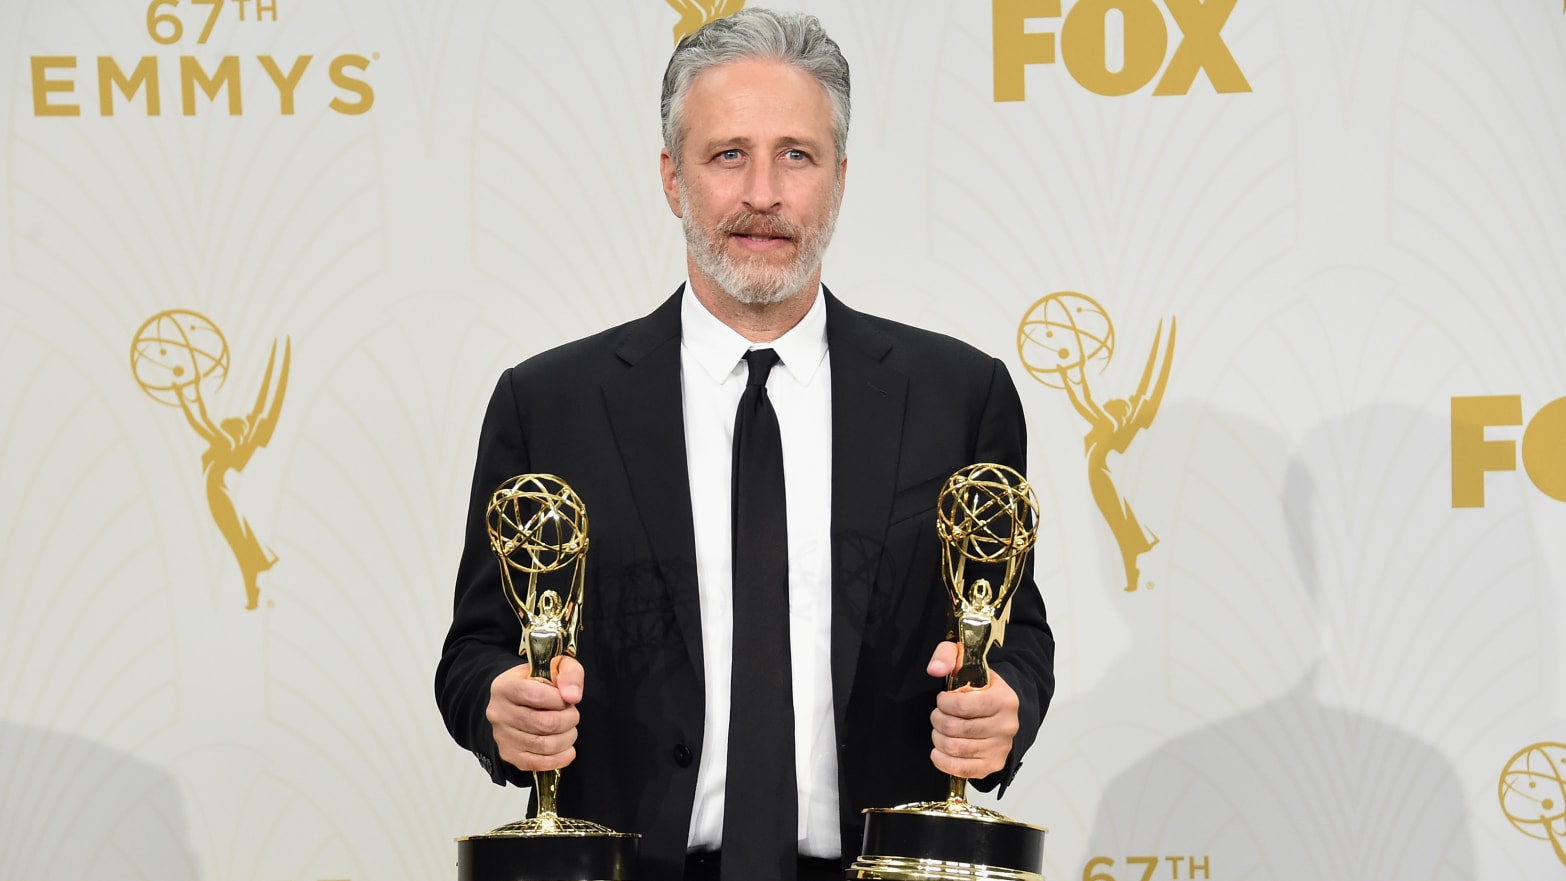 A picture of Jon Stewart holding two Emmys.